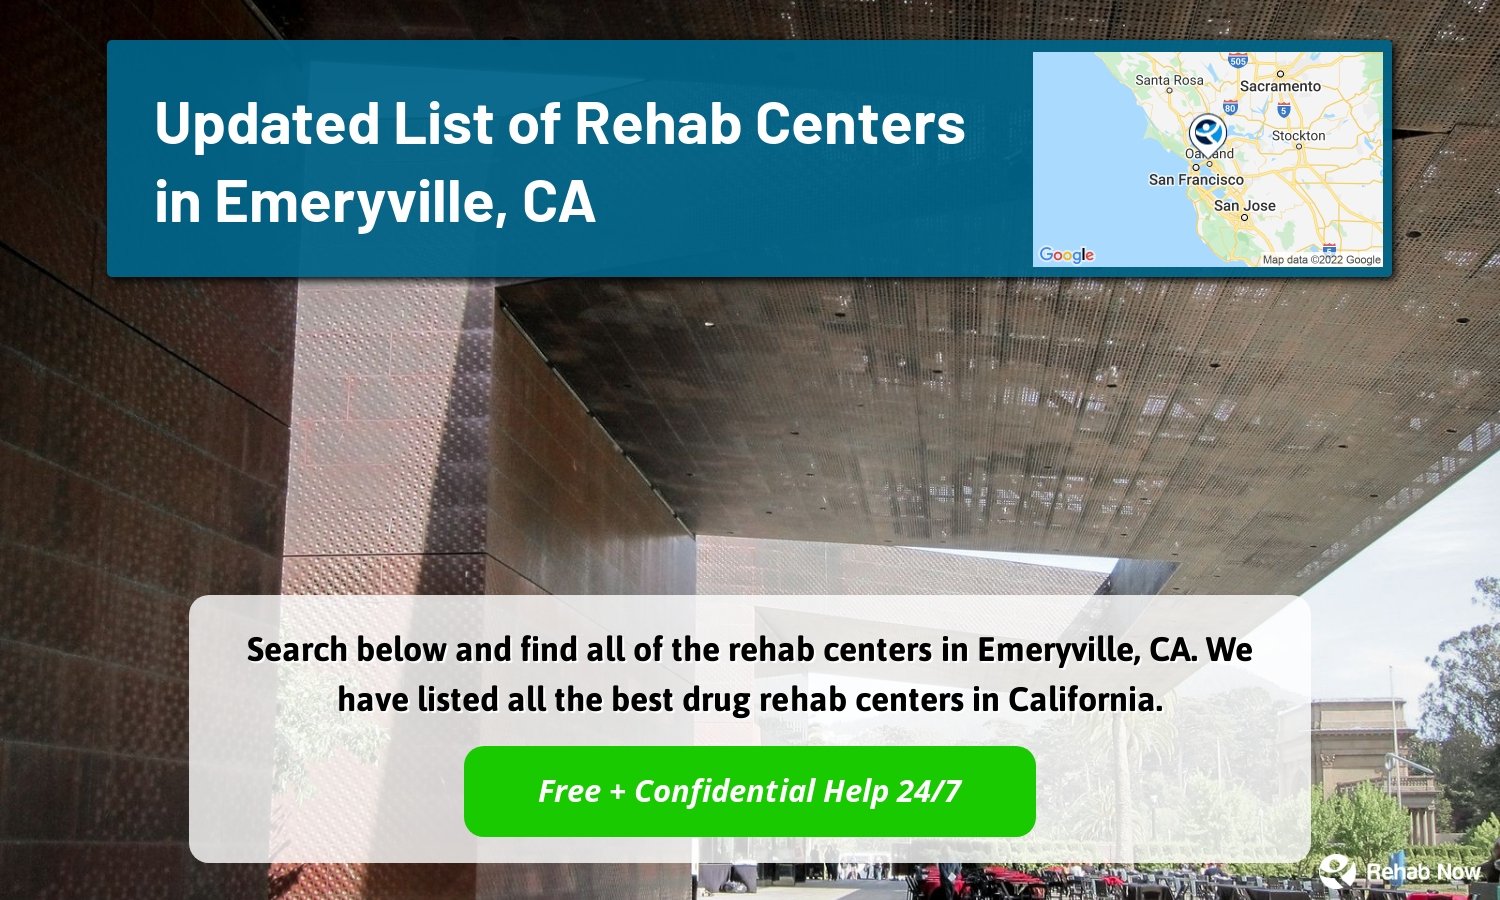 Search below and find all of the rehab centers in Emeryville, CA. We have listed all the best drug rehab centers in California.